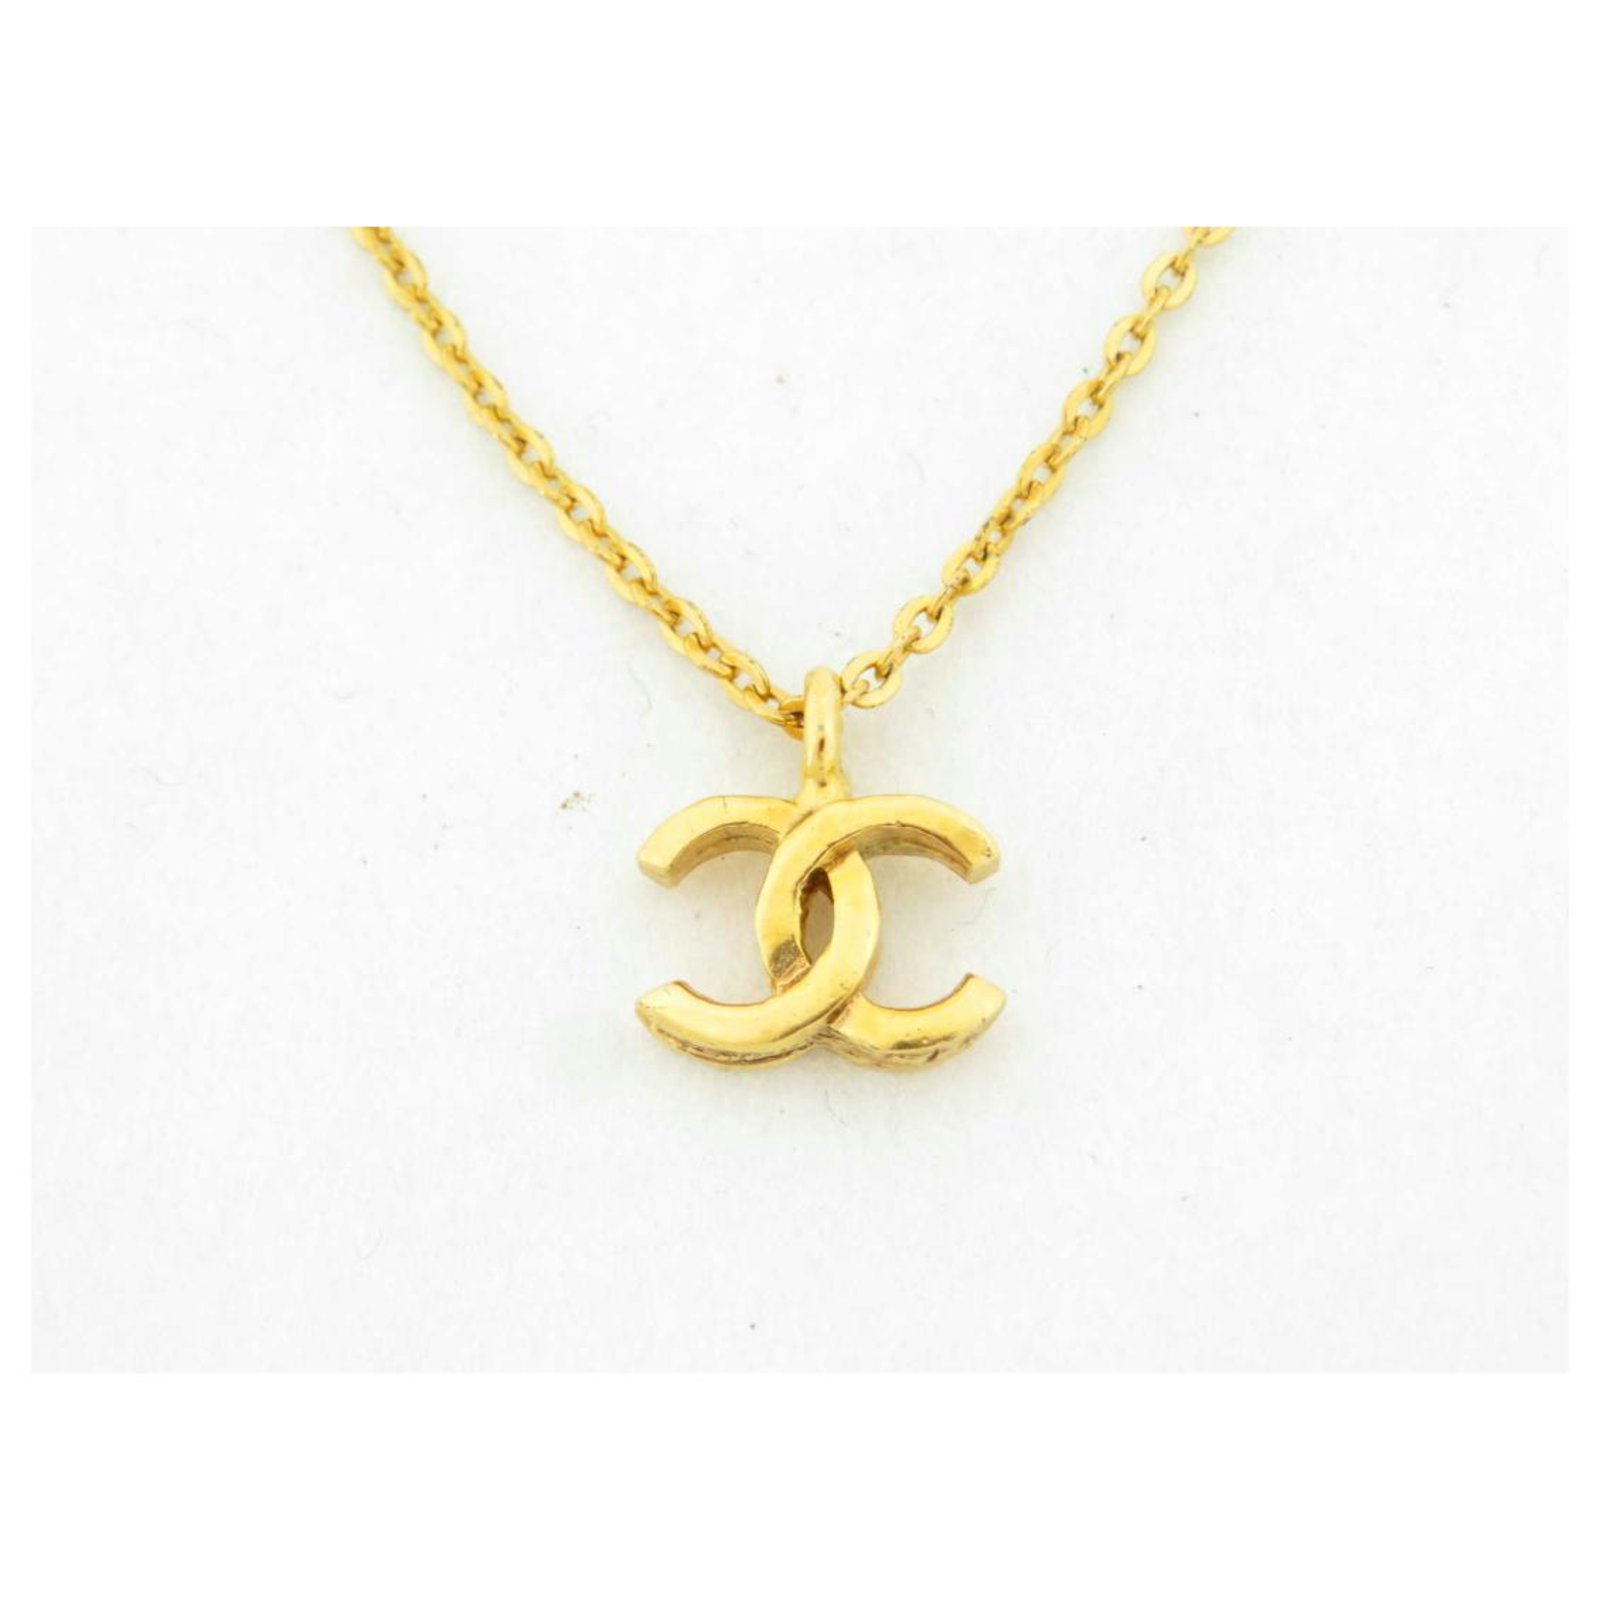 Chanel Large CC Pendant Necklace  Rent Chanel jewelry for $55/month